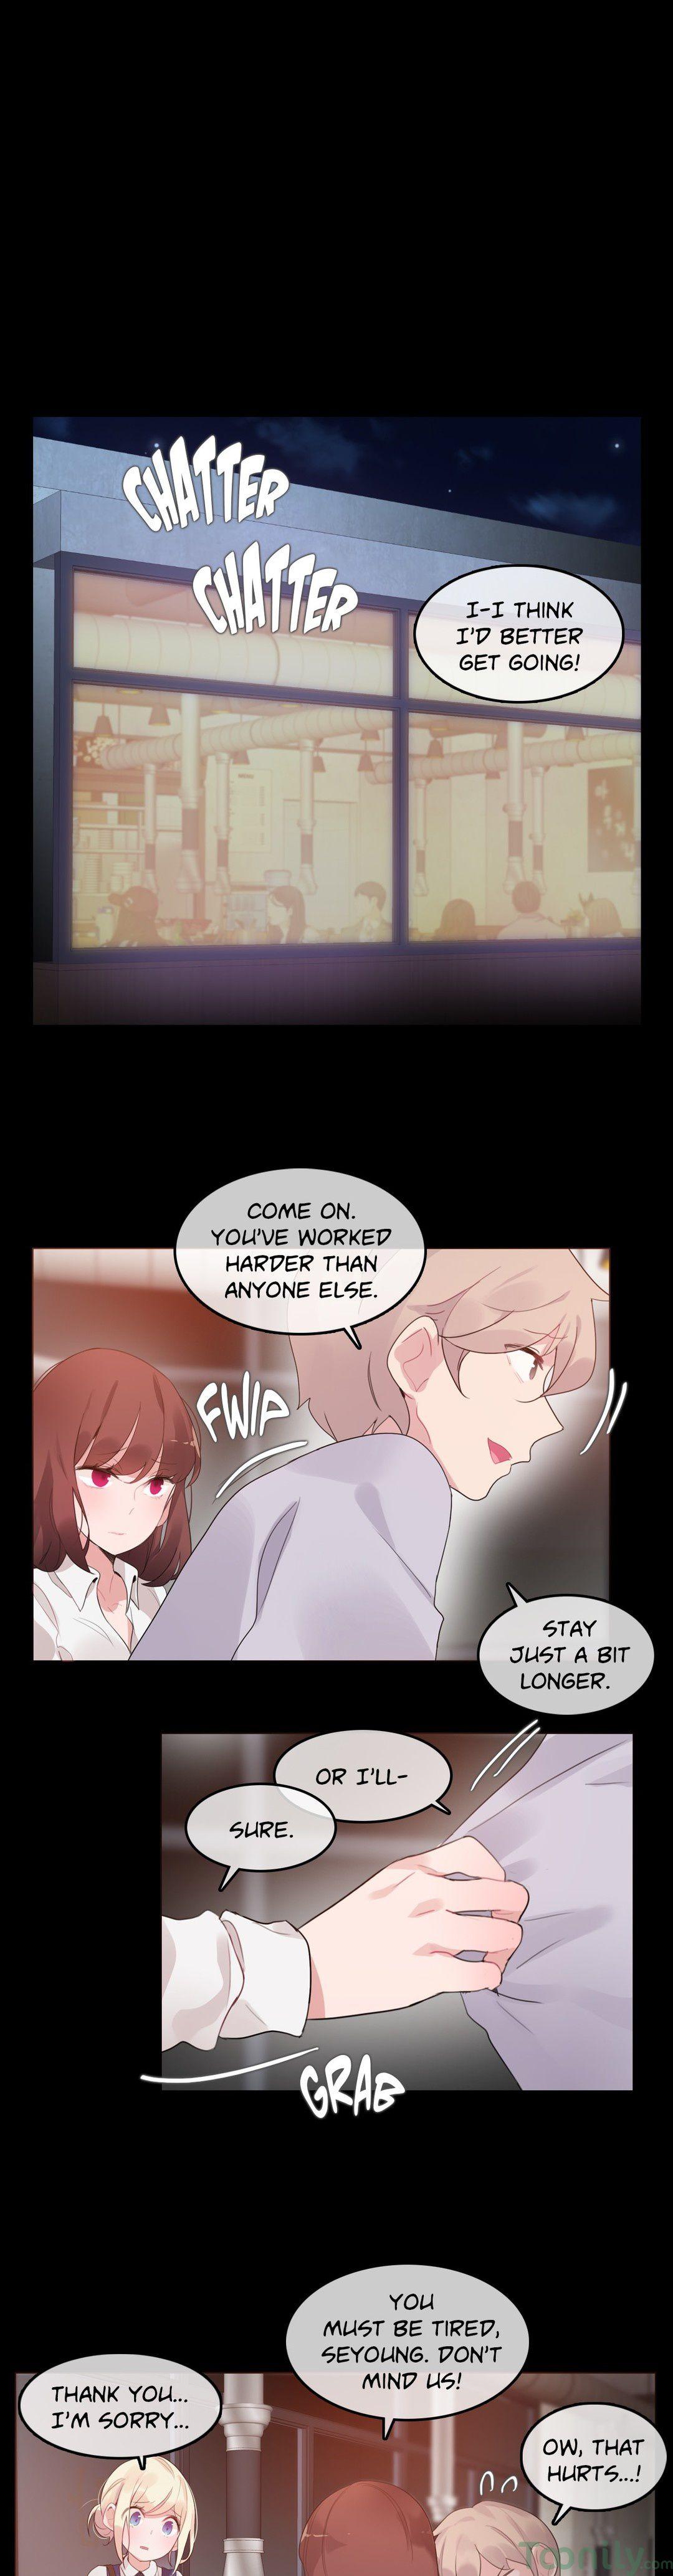 A Pervert's Daily Life • Chapter 61-65 33